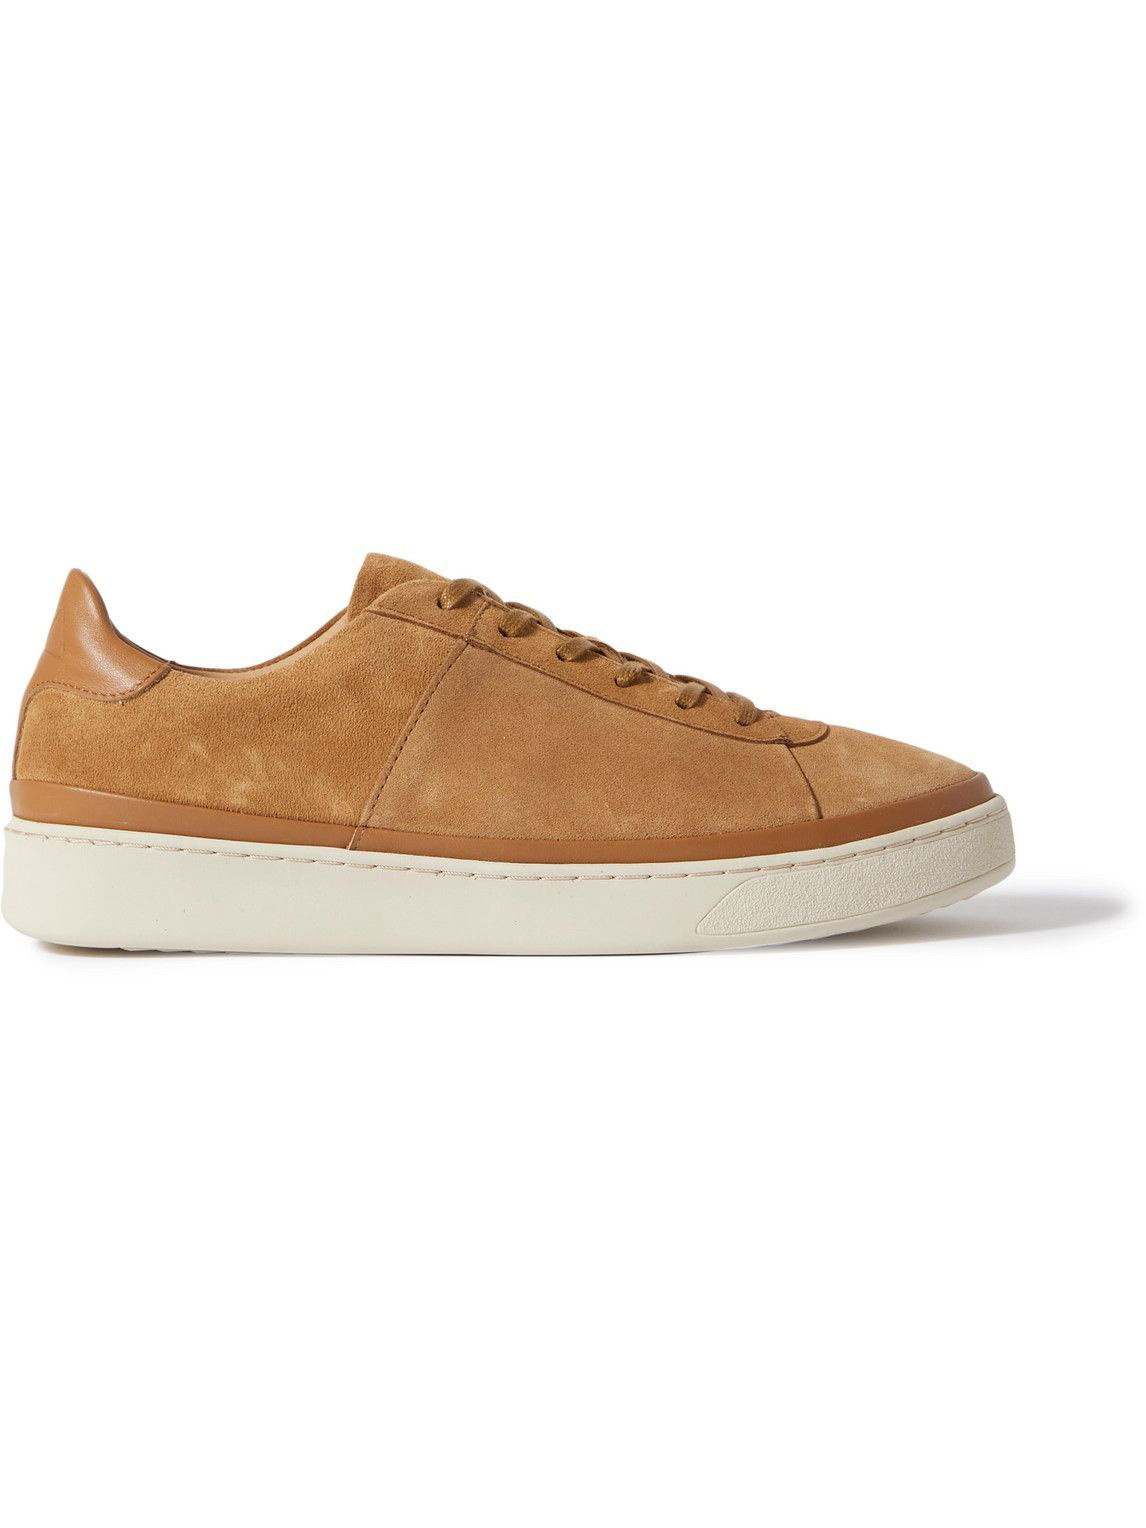 Mulo - Leather-Trimmed Waxed-Suede Sneakers - Brown Mulo